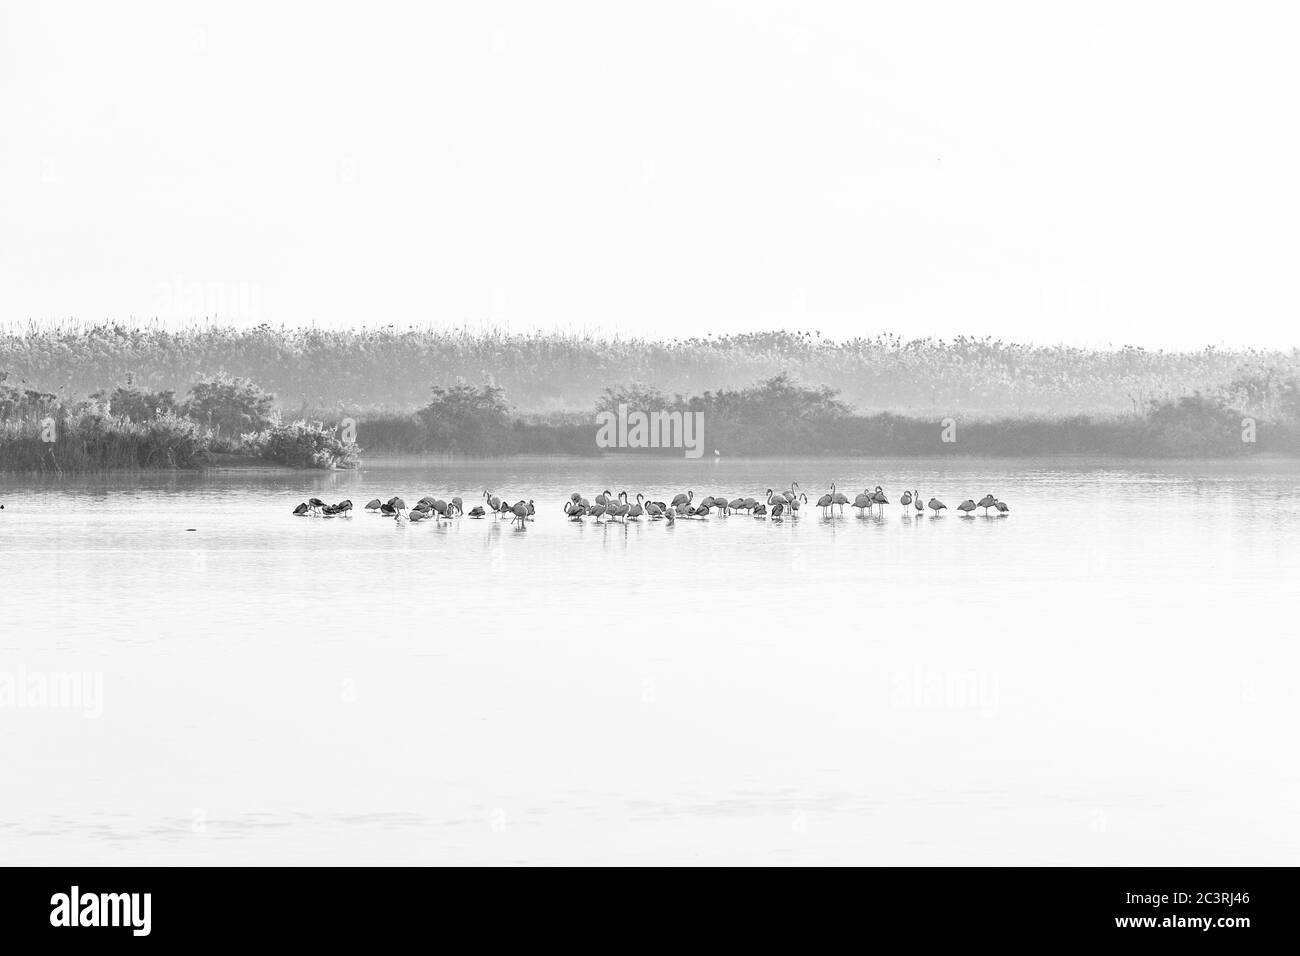 Grayscale shot of flamingos group in a calm lake Stock Photo